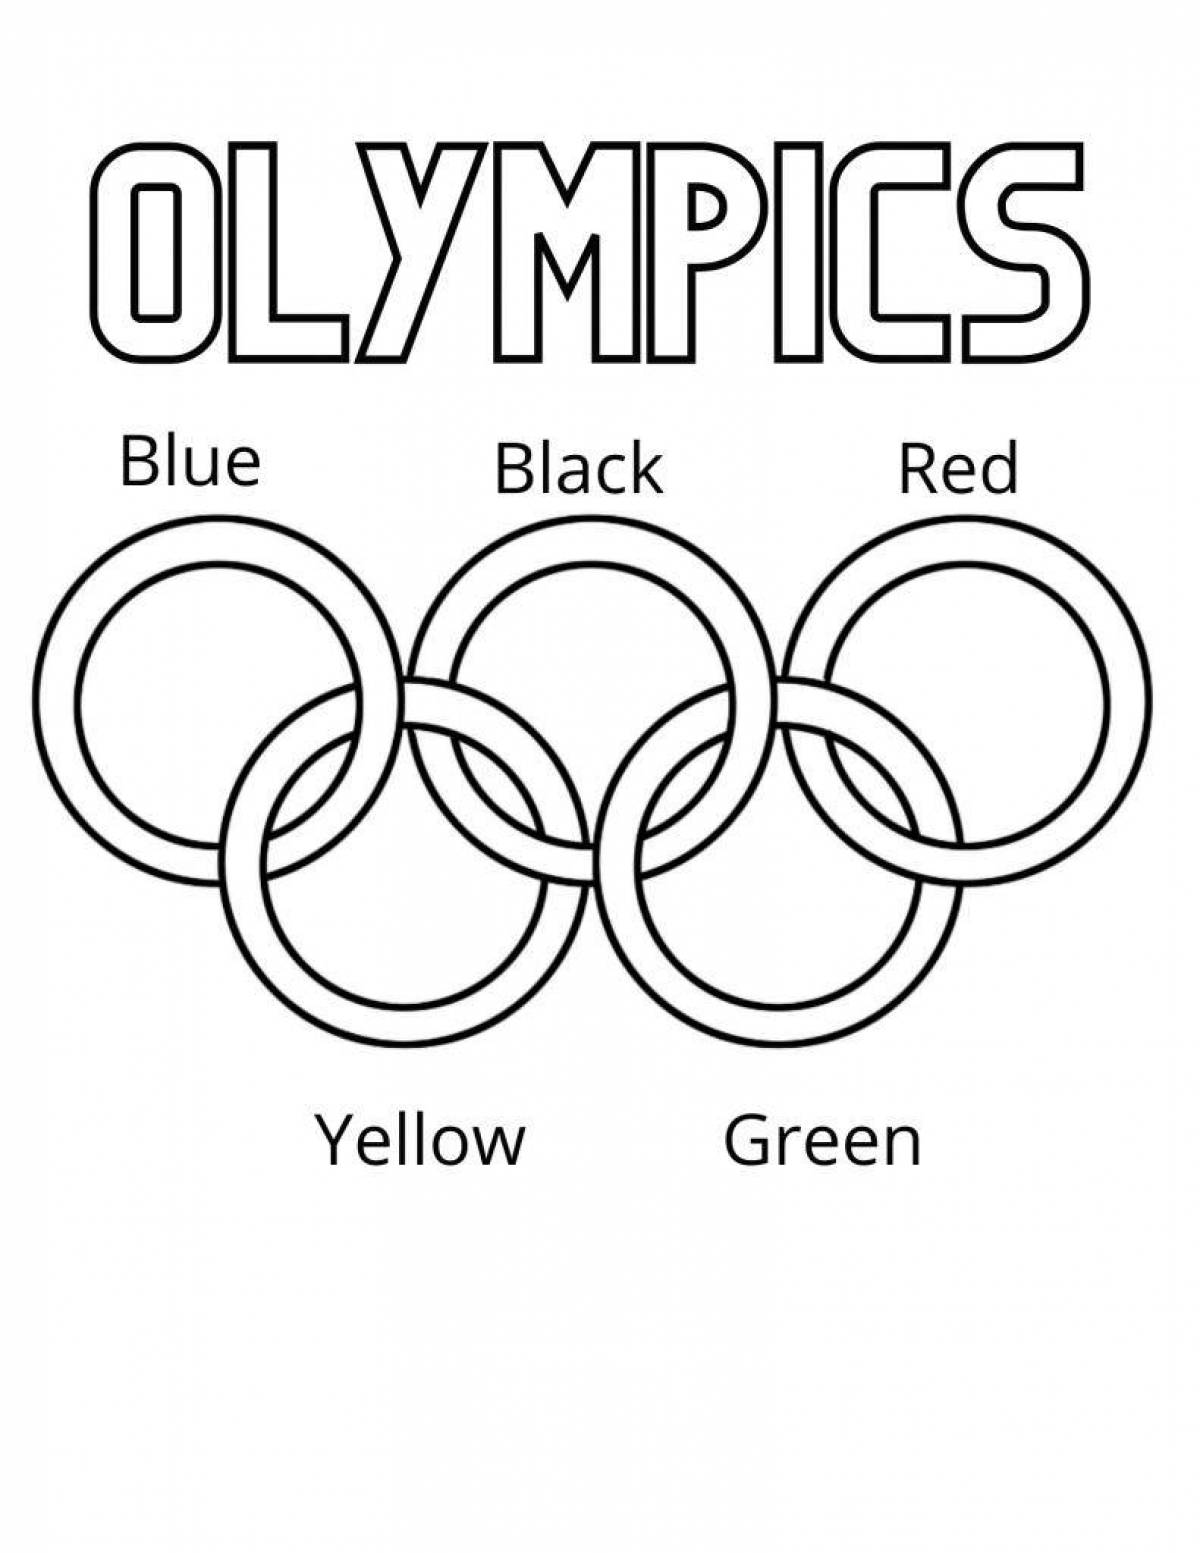 Outstanding olympic games coloring book for kids